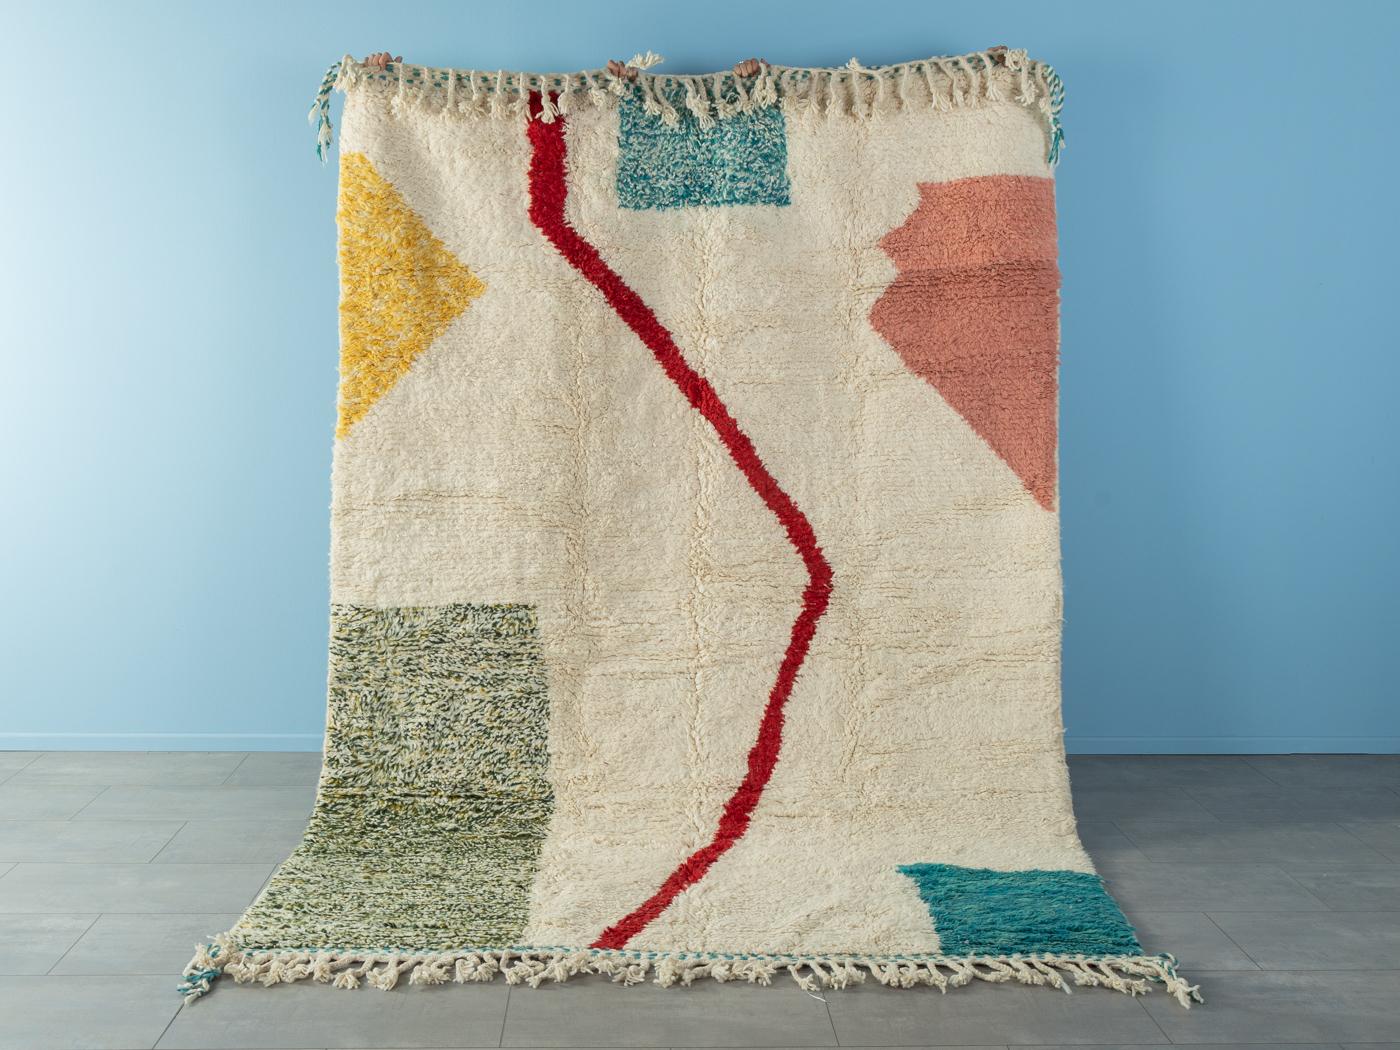 Abstraction V is a contemporary 100% wool rug – thick and soft, comfortable underfoot. Our Berber rugs are handwoven and handknotted by Amazigh women in the Atlas Mountains. These communities have been crafting rugs for thousands of years. One knot